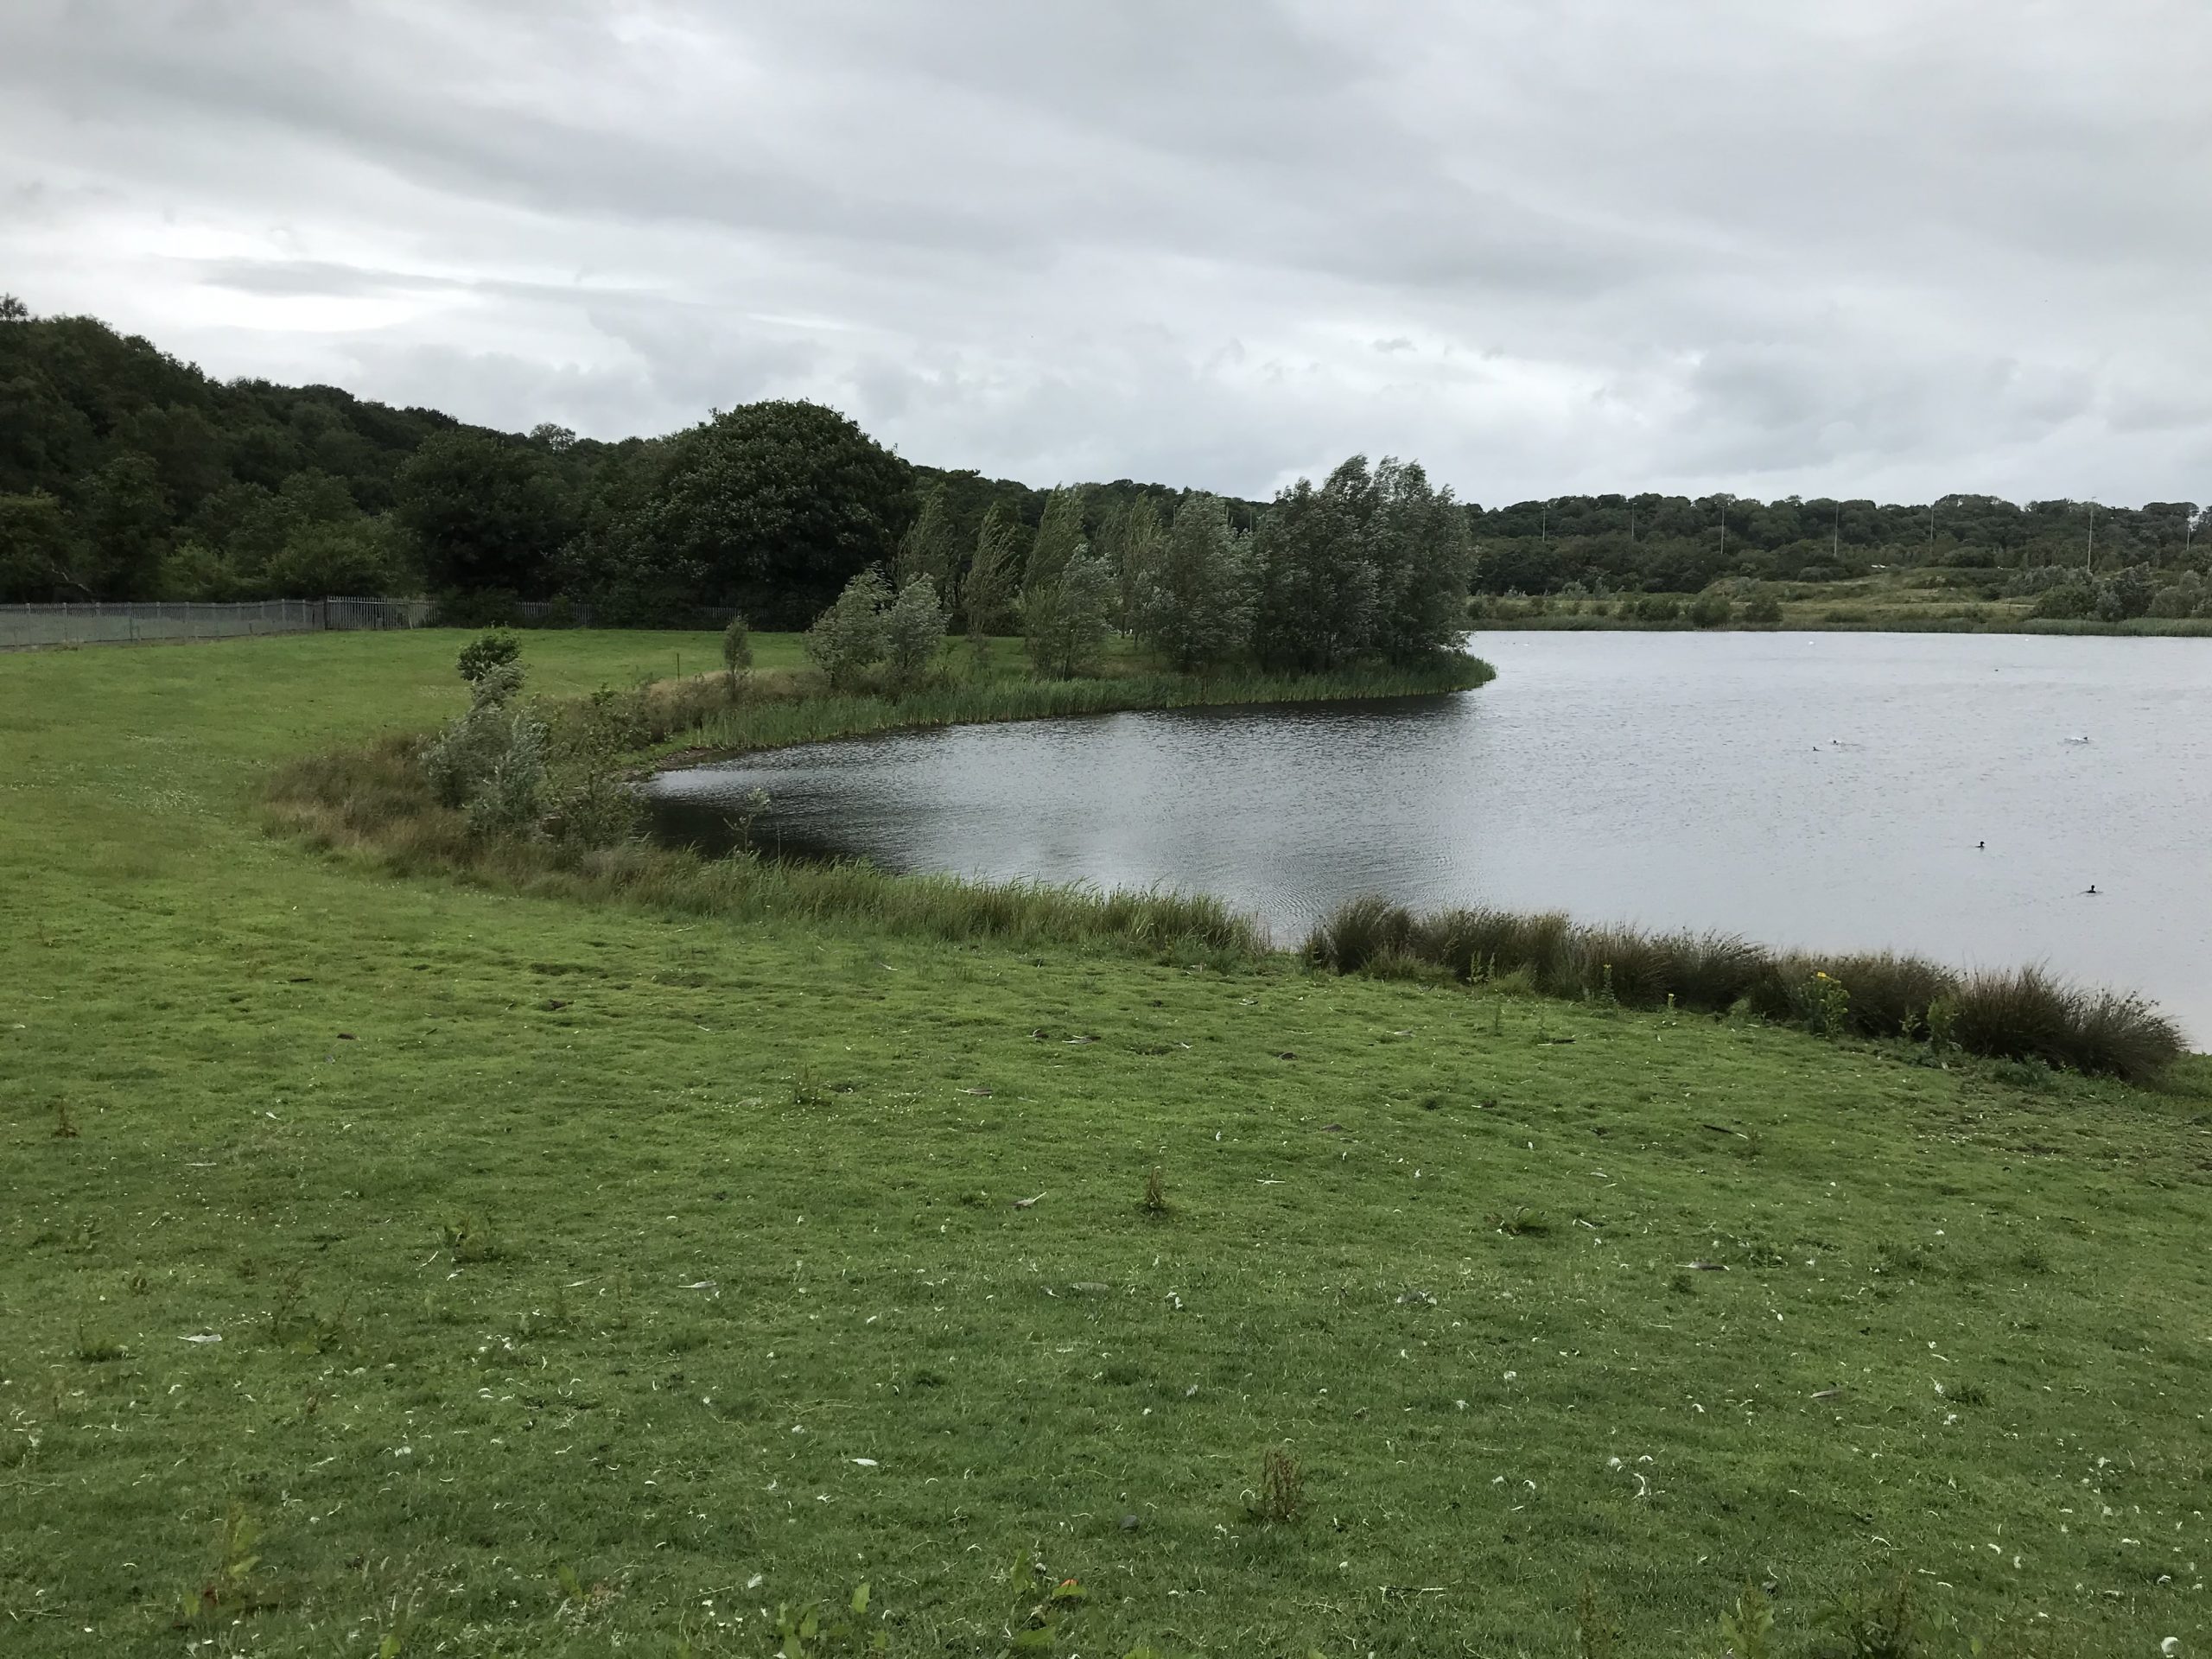 Planning application for a new quarry in Stanley Ferry submitted